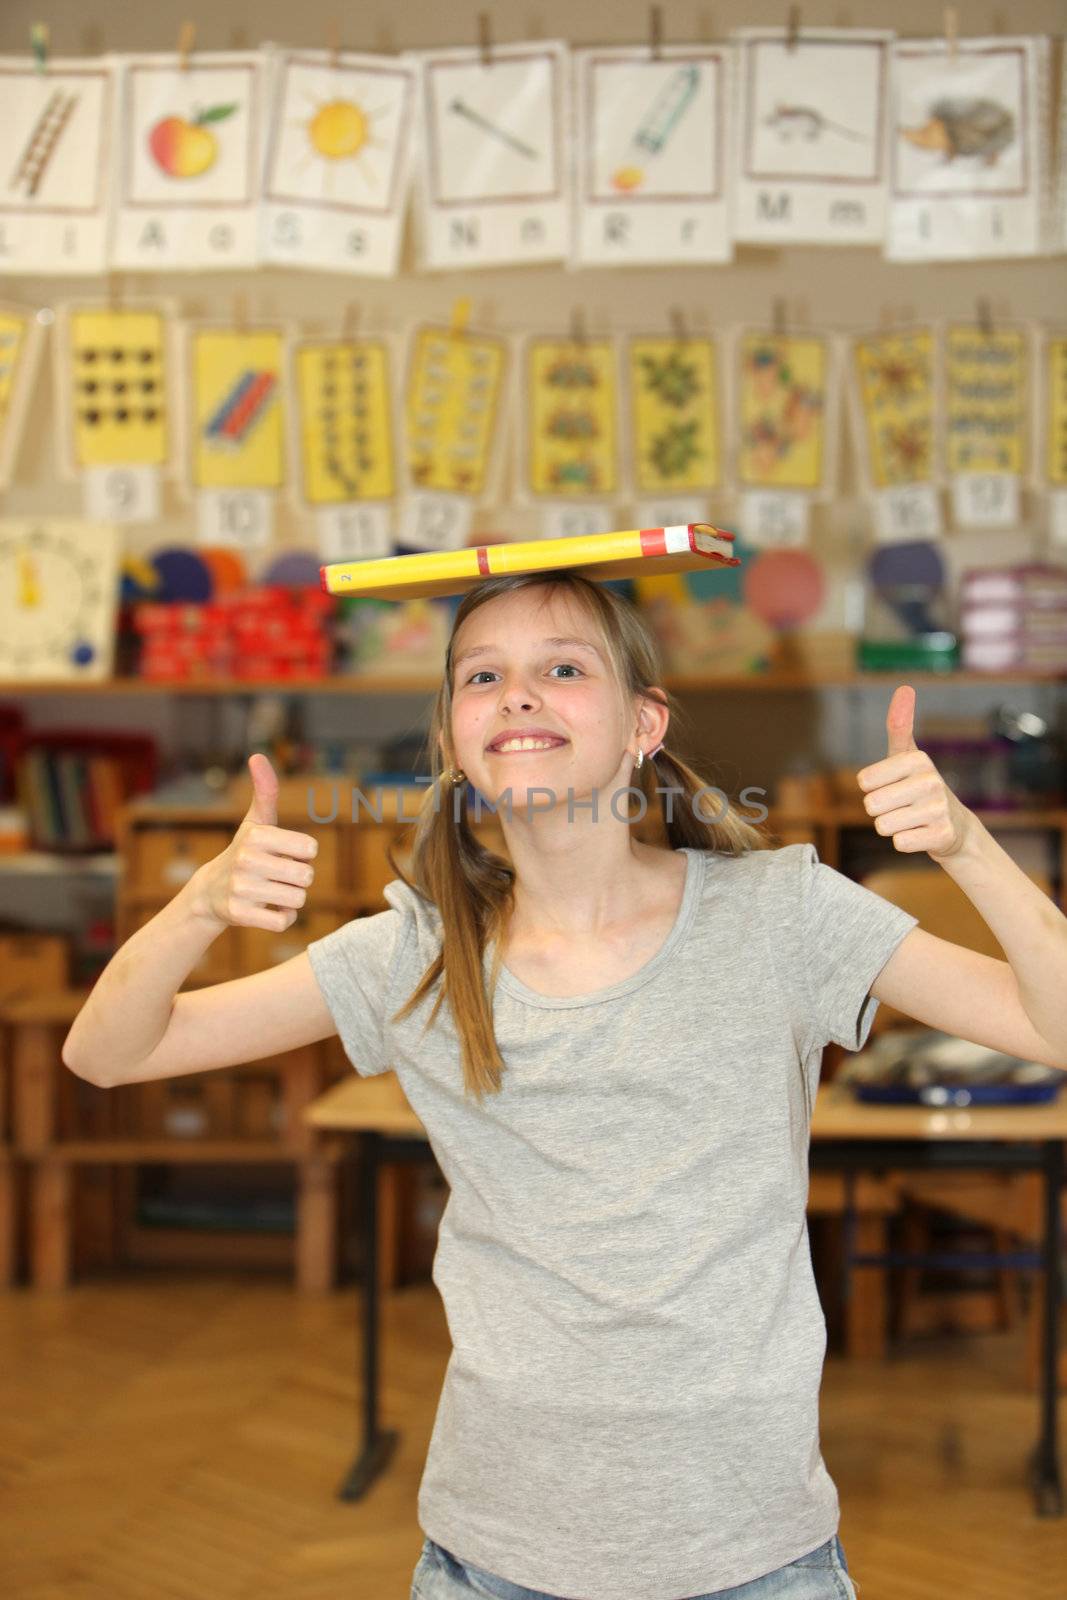 Hilarious girl at school shows thumb up. She has a textbook on the head.
